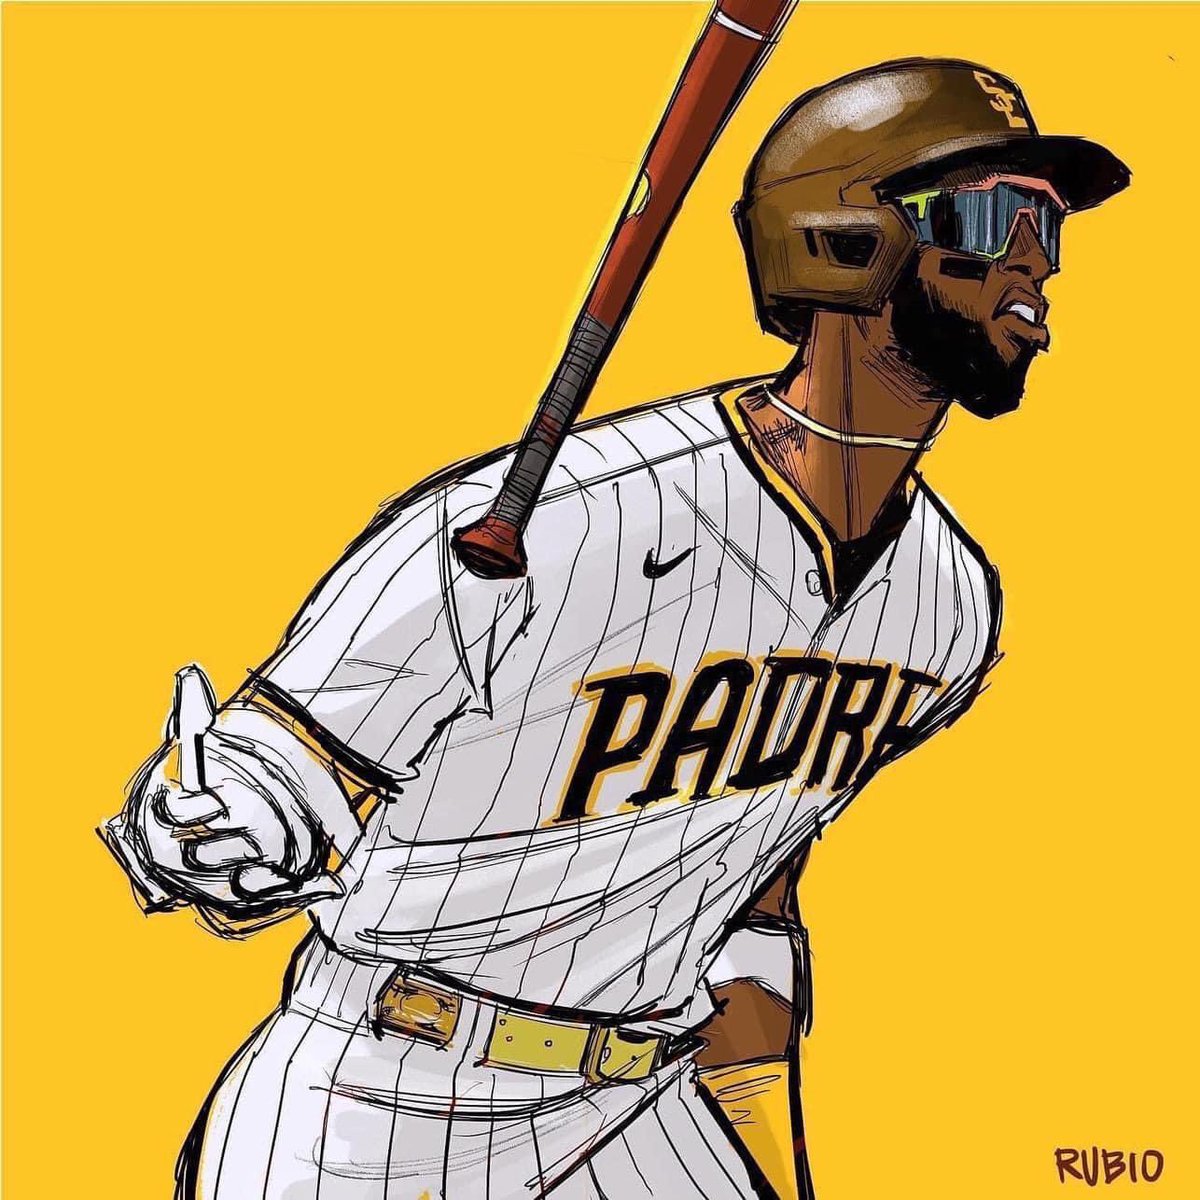 SLAM DIEGO Oh, it’s been a while. I’m hoping I can start wearing my SLAM DIEGO shirts more often. Yeah #JakeCronenworth and #JuricksonProfar are representing and BRINGING IT BACK! @Padres #FriarFaithful #SanDiegoPadres #LFG ✊🏾✊✊🏾✊